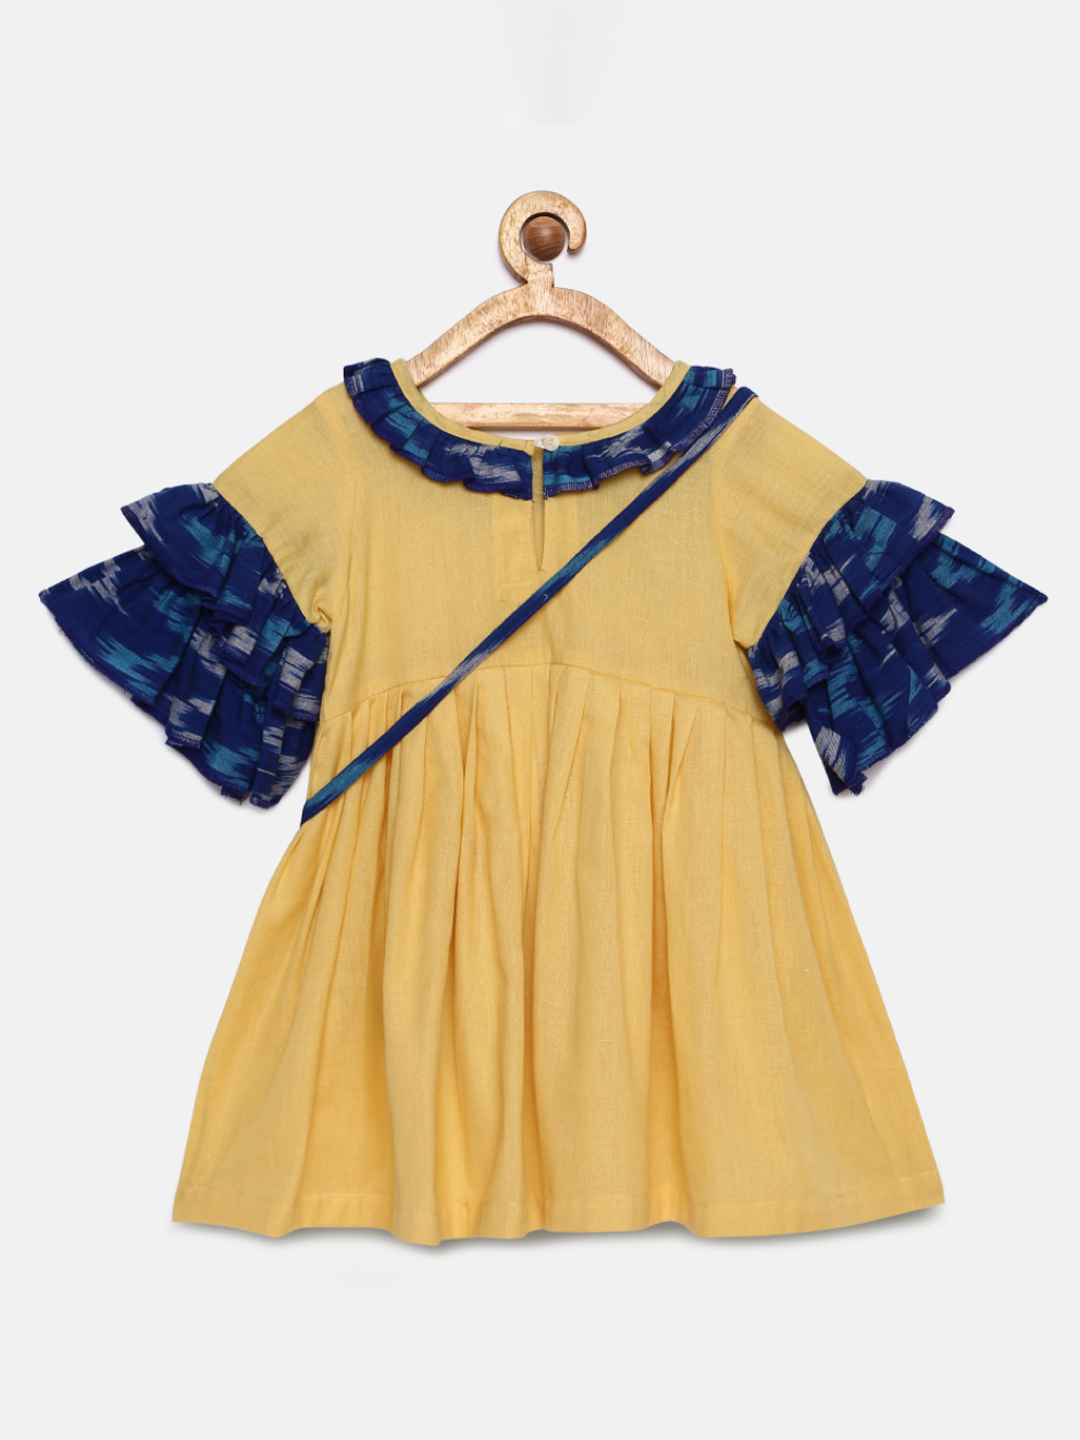 6 1 Ikat Asymmetric Dress with Sling Bag- Yellow and Blue